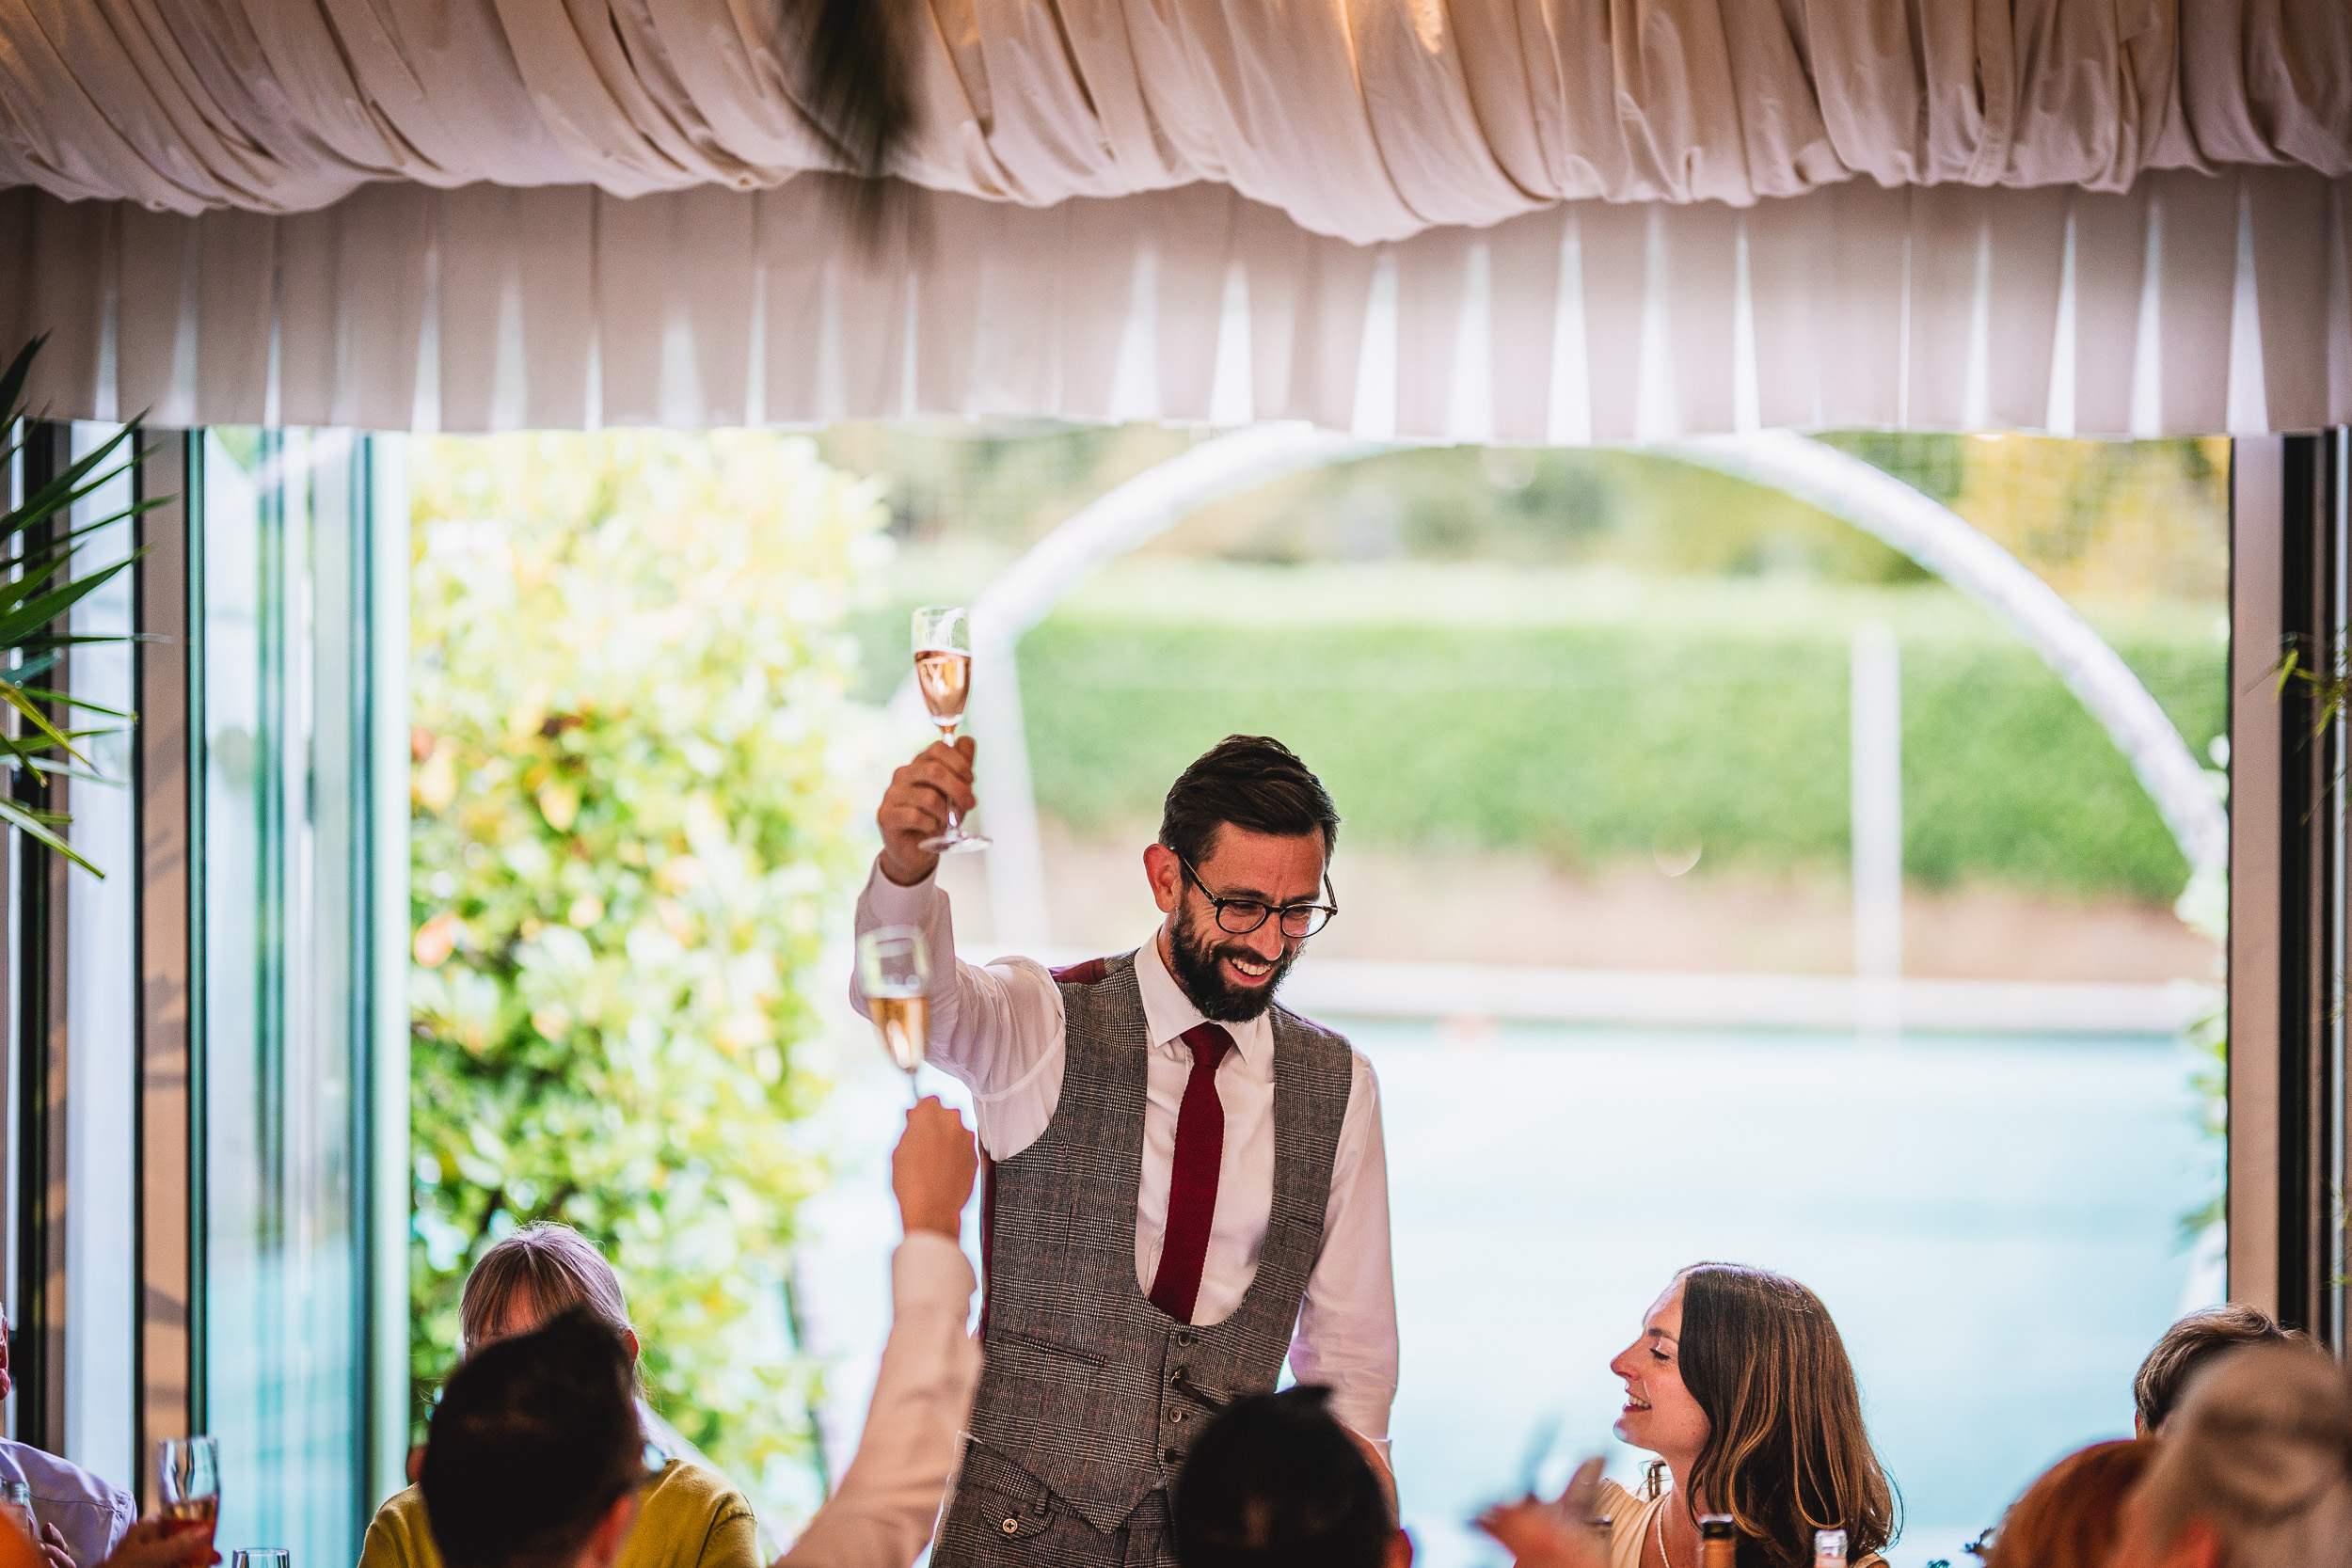 A man holding a glass of wine at a Surrey wedding reception.